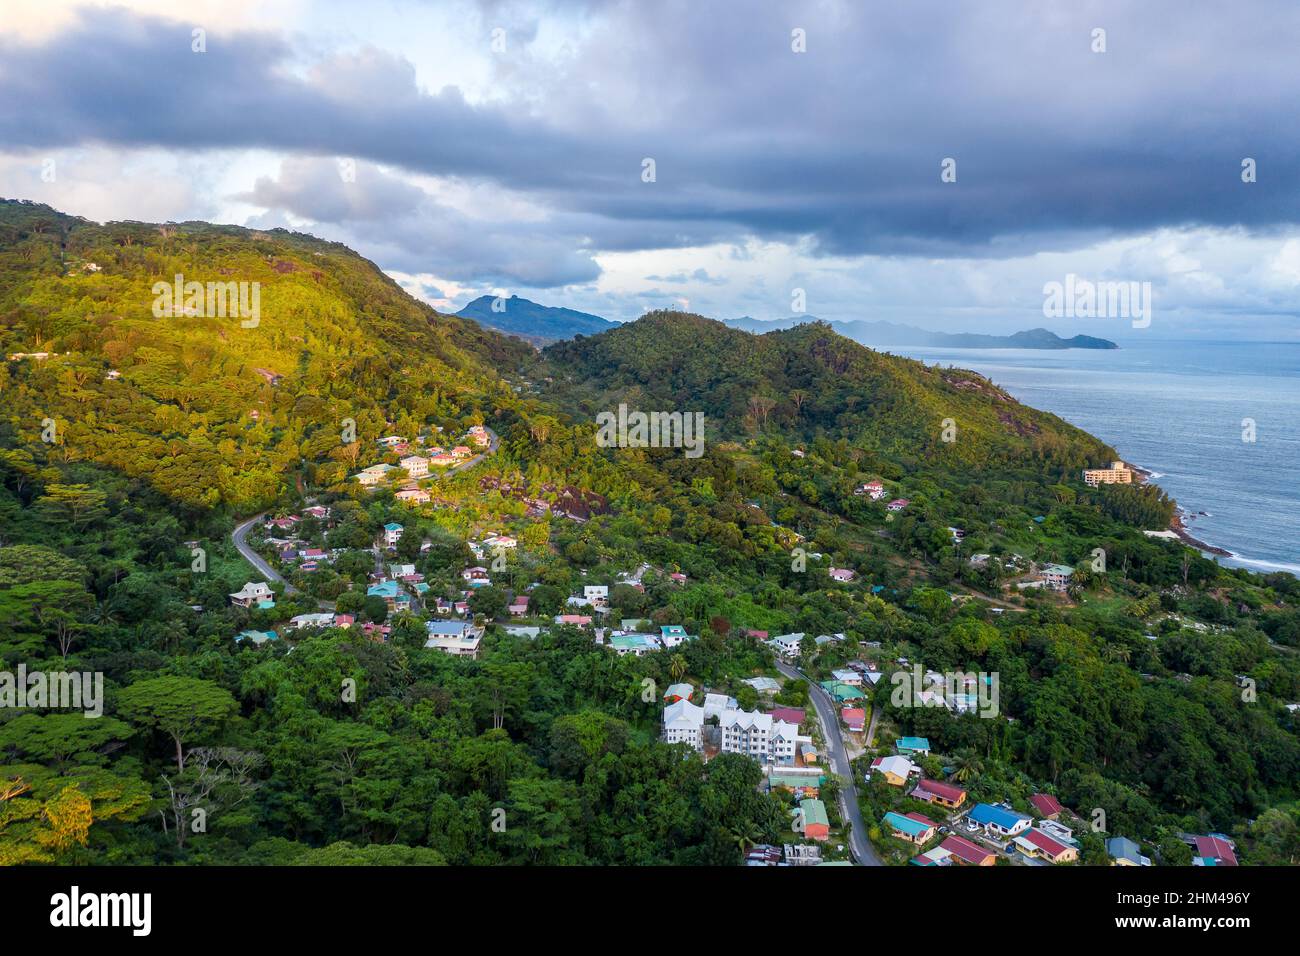 Mahe Island with Port Glaud village drone landscape, with lush tropical forest of Morne Seychellois National Park and Indian Ocean on the horizon. Stock Photo